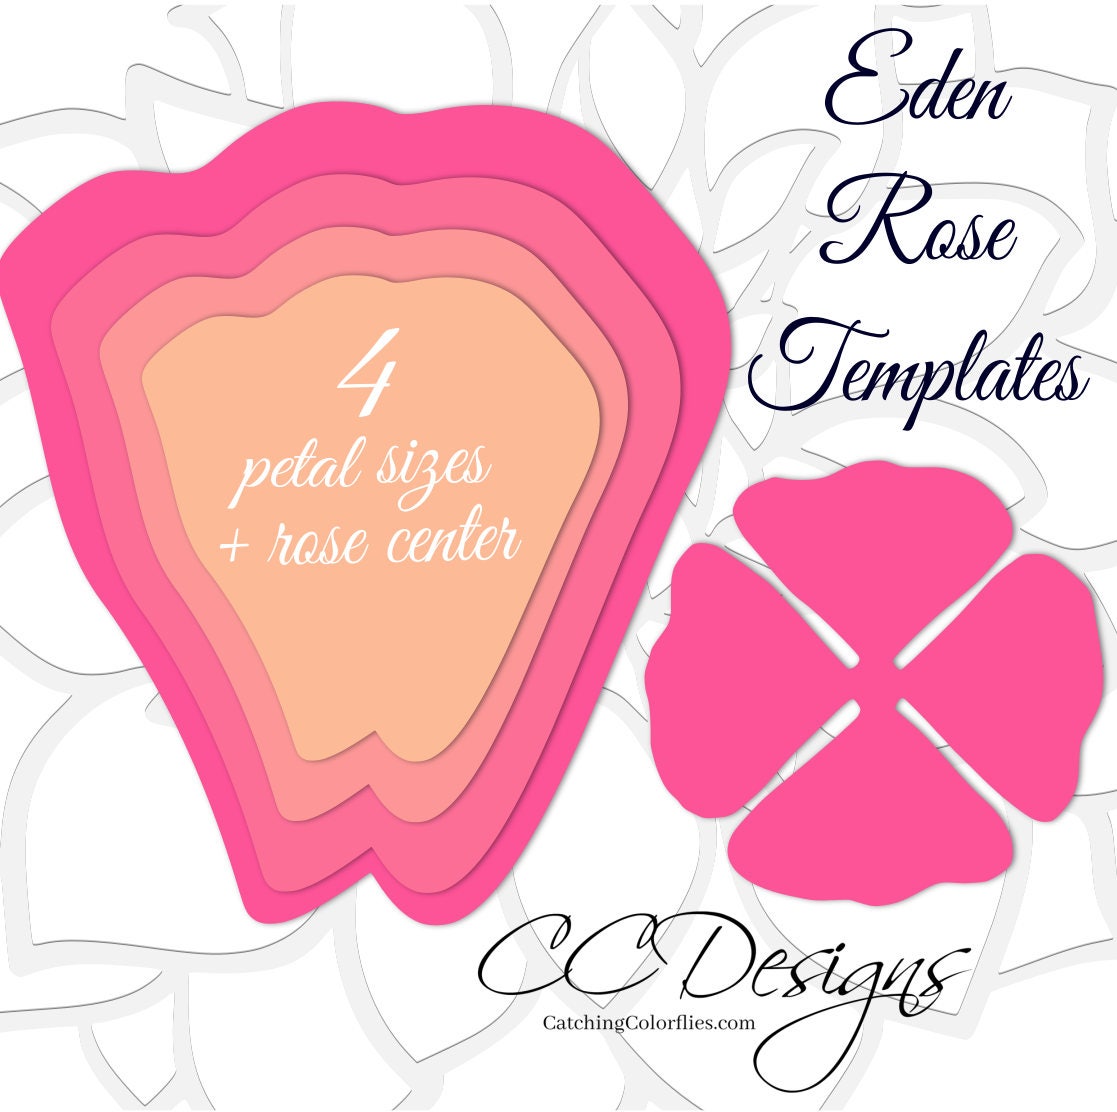 Download Giant Paper Rose Templates Easy Printable PDF Rose Template